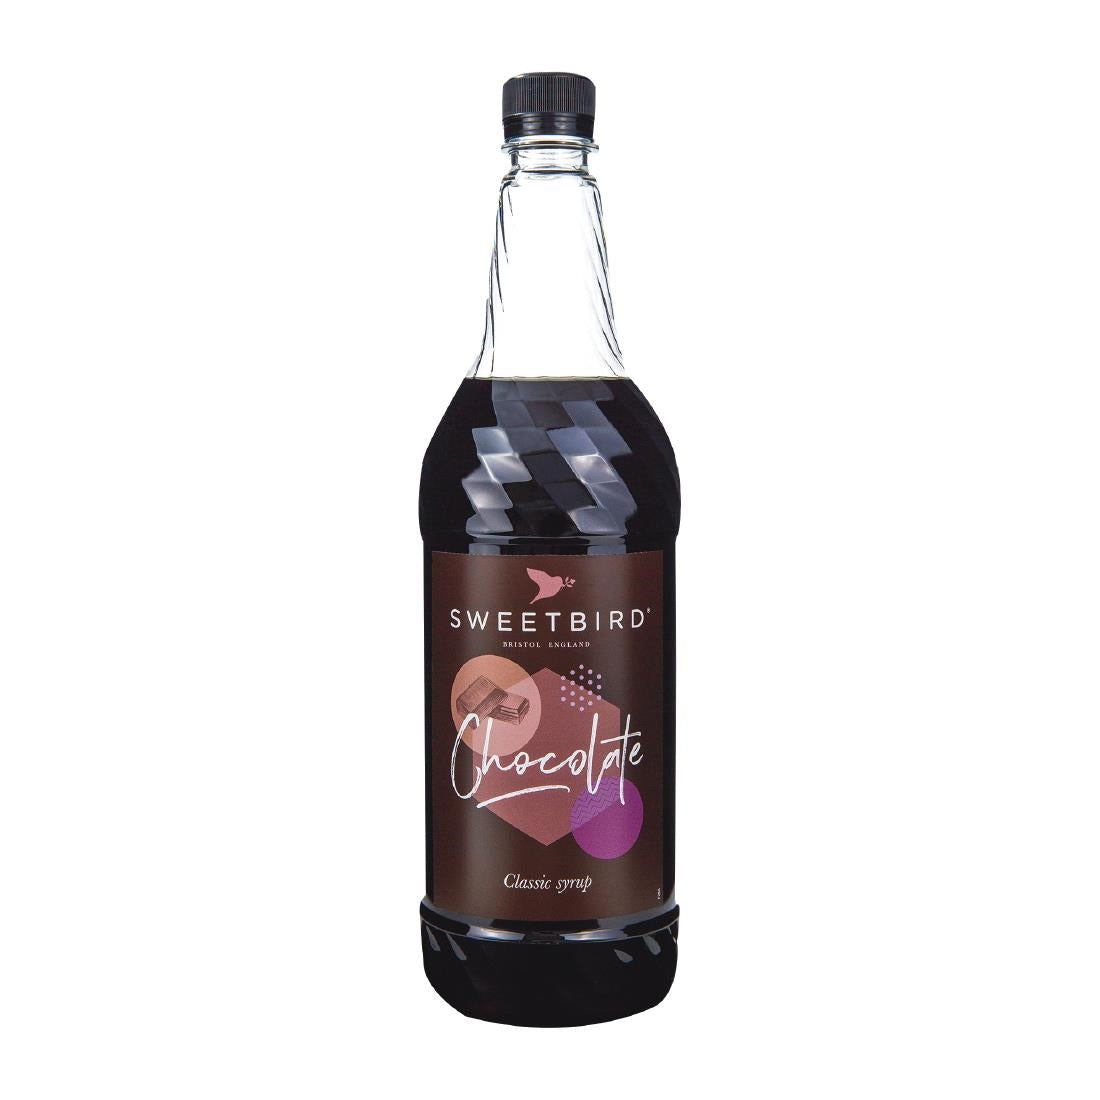 FS242 Sweetbird Chocolate Syrup 1 Ltr JD Catering Equipment Solutions Ltd